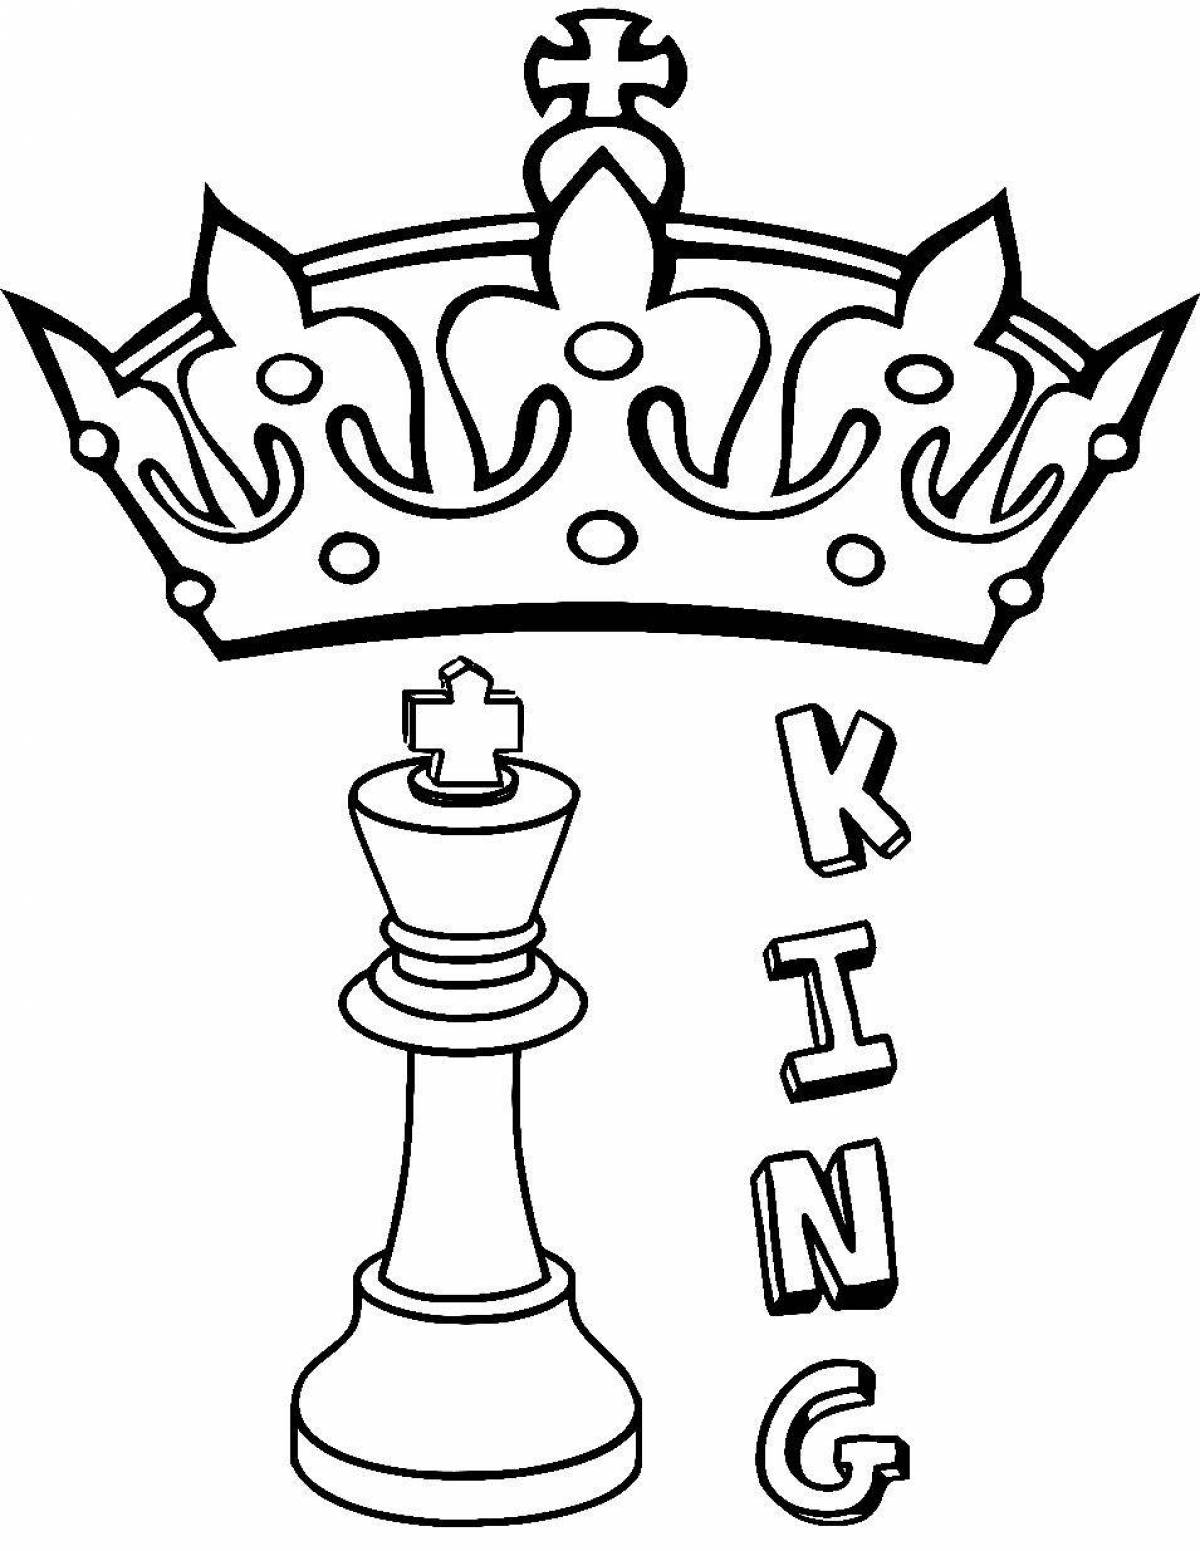 Coloring majestic chess king